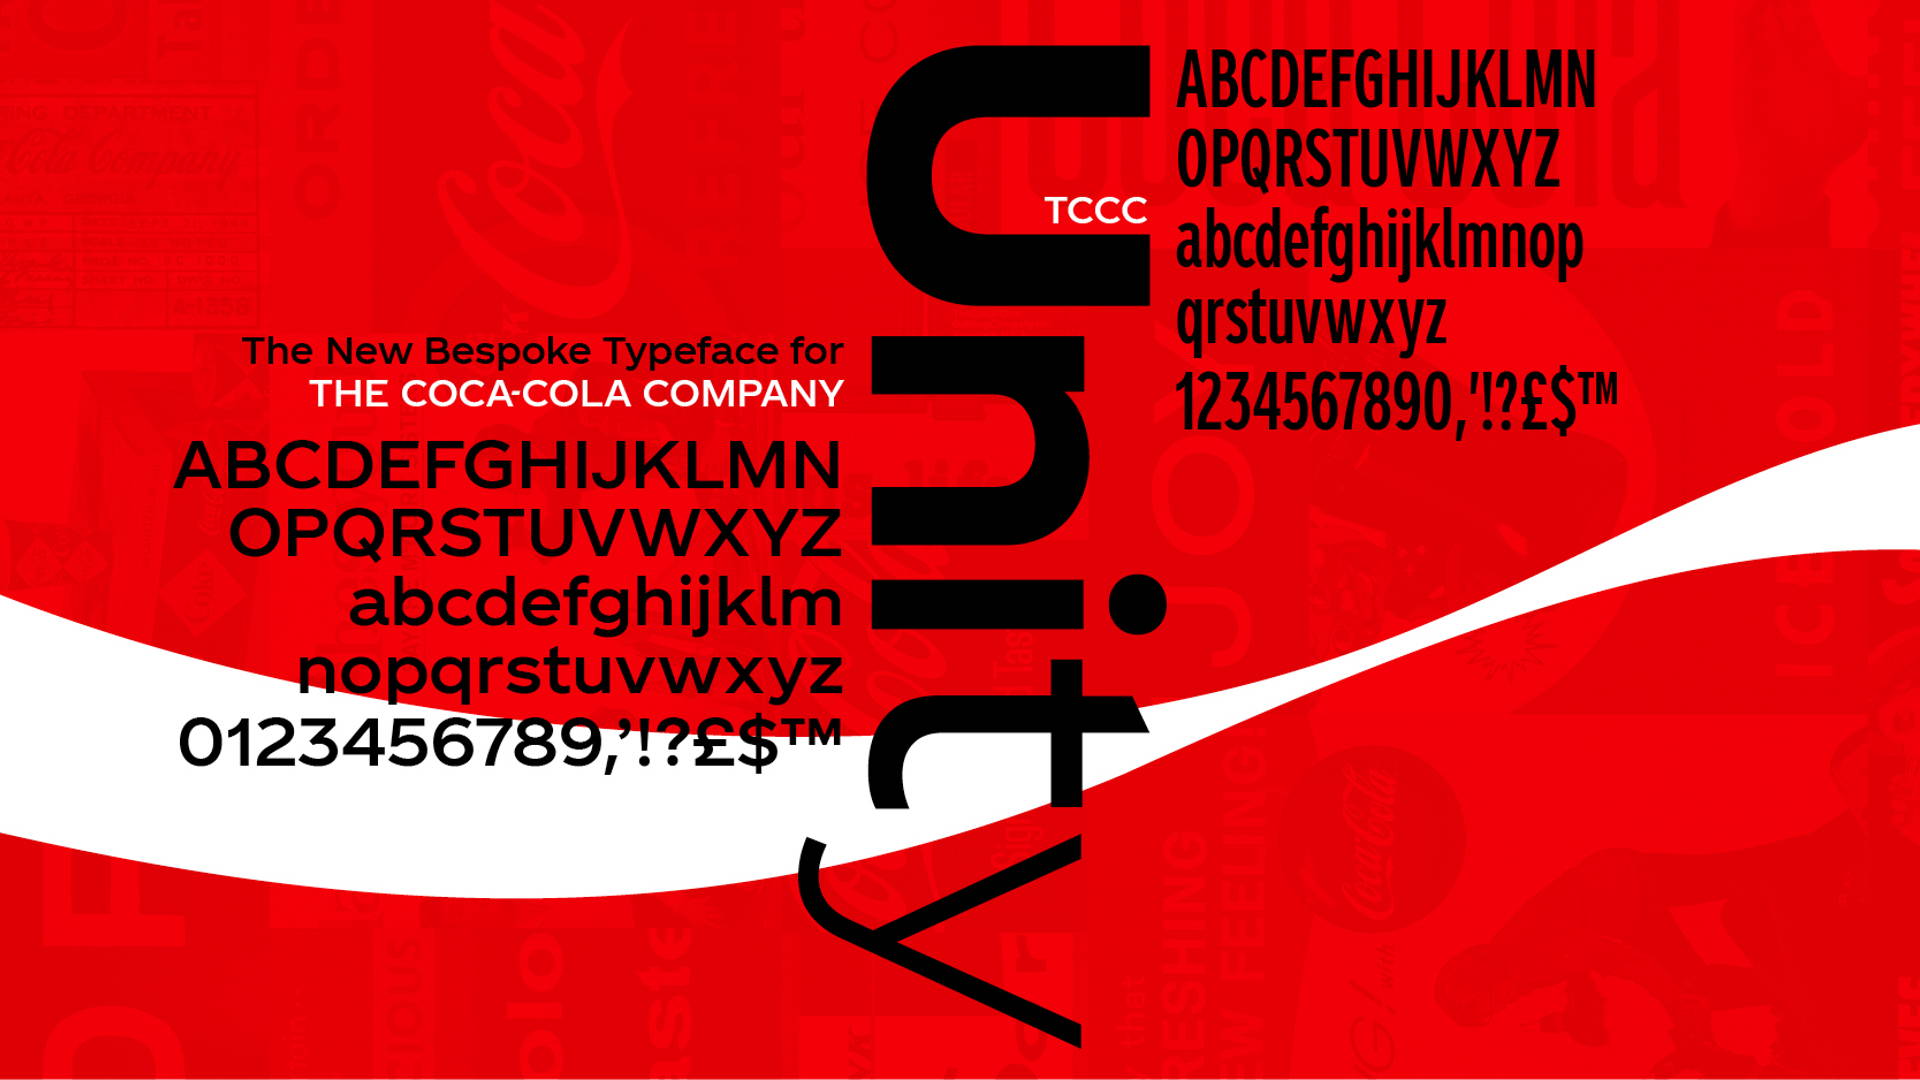 Featured image for Introducing TCCC Unity: A Bespoke Typeface from an Iconic Soda Brand